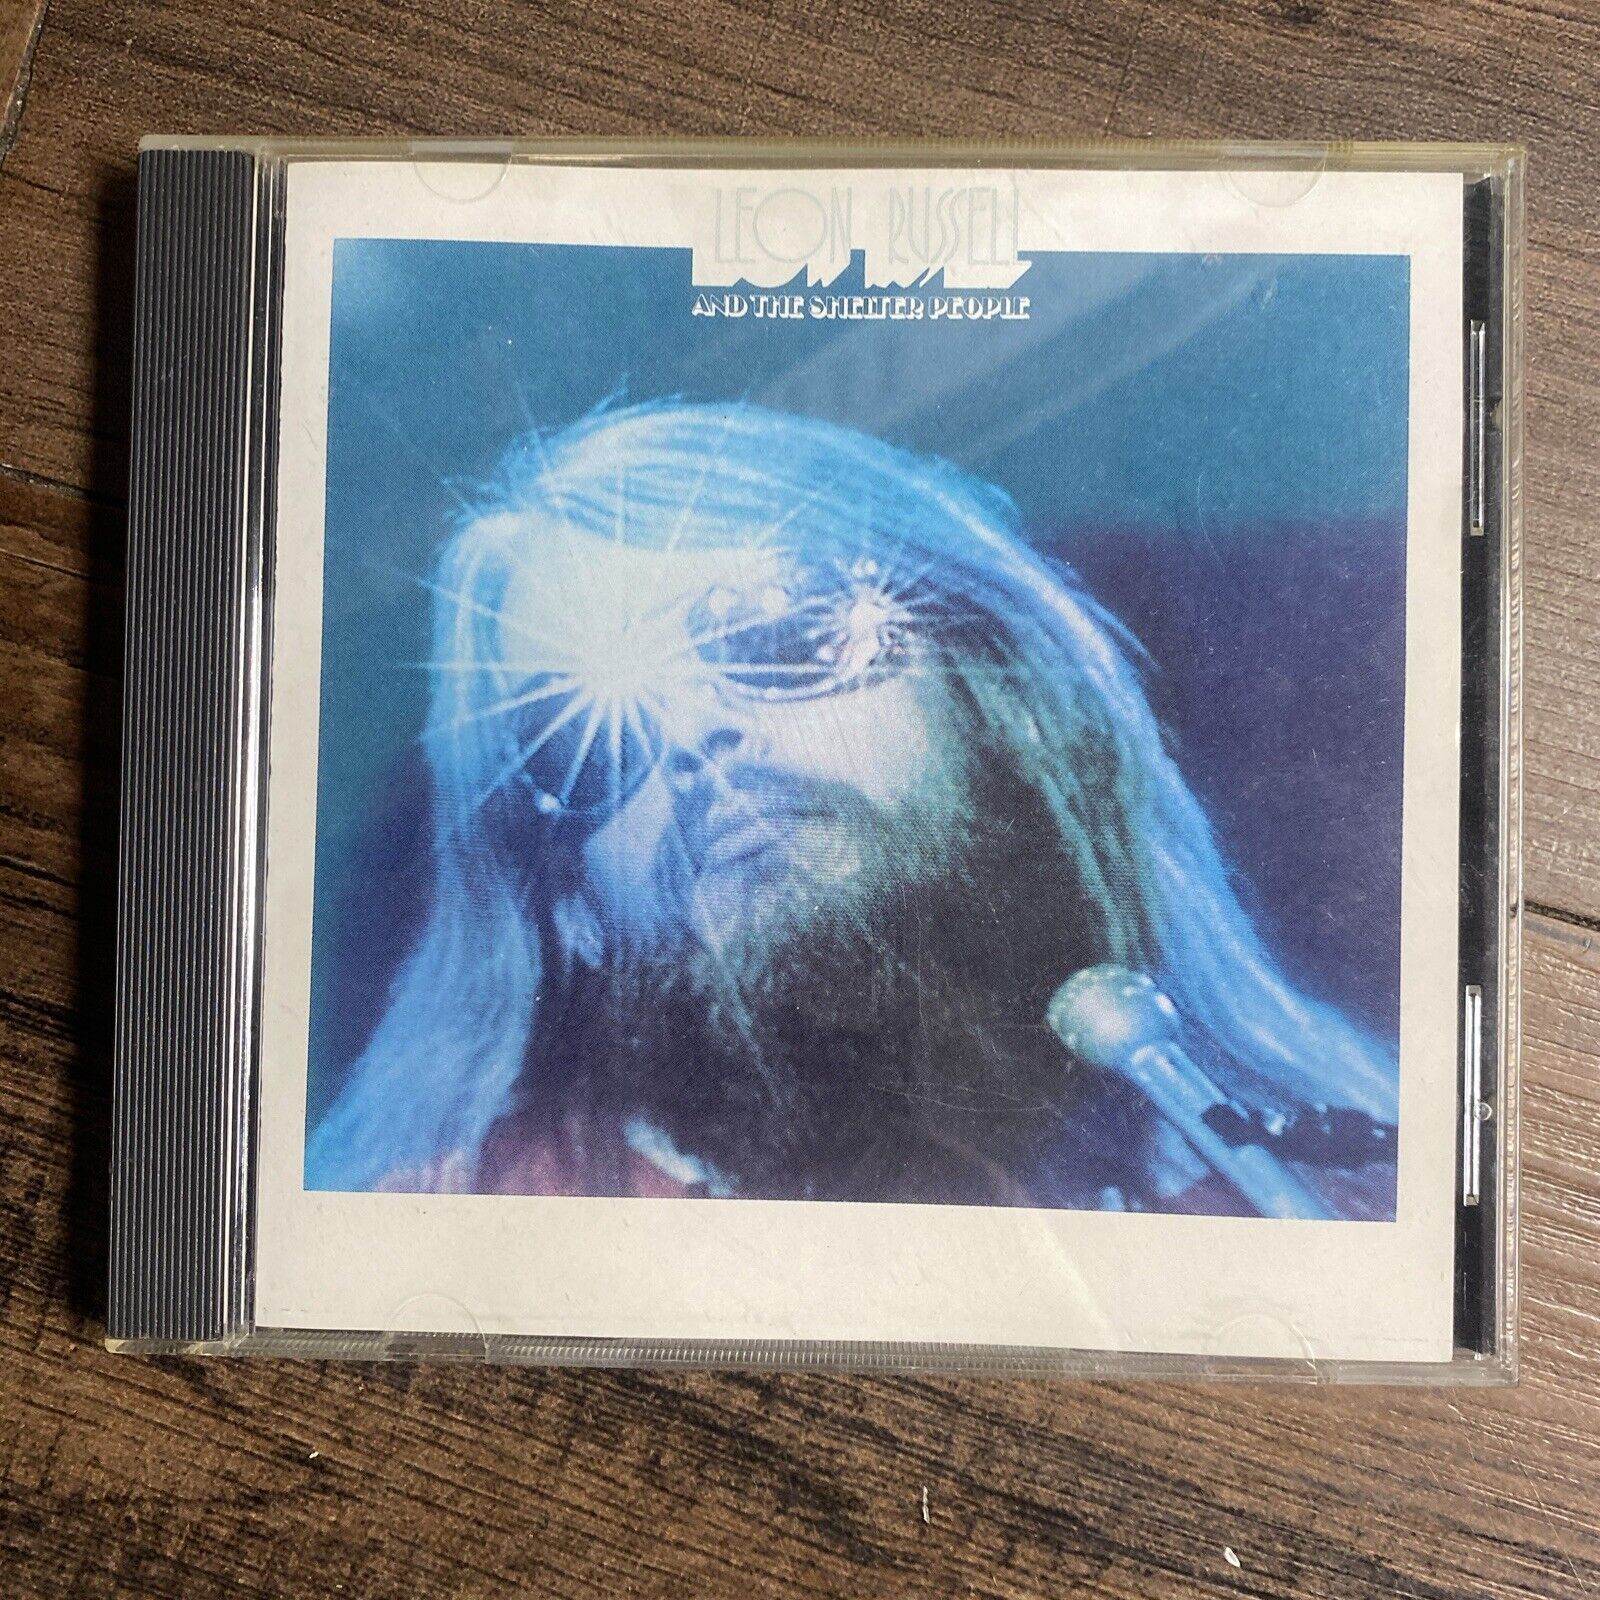 Leon Russell - Leon Russell And The Shelter People- CD (1989) DCC Classics